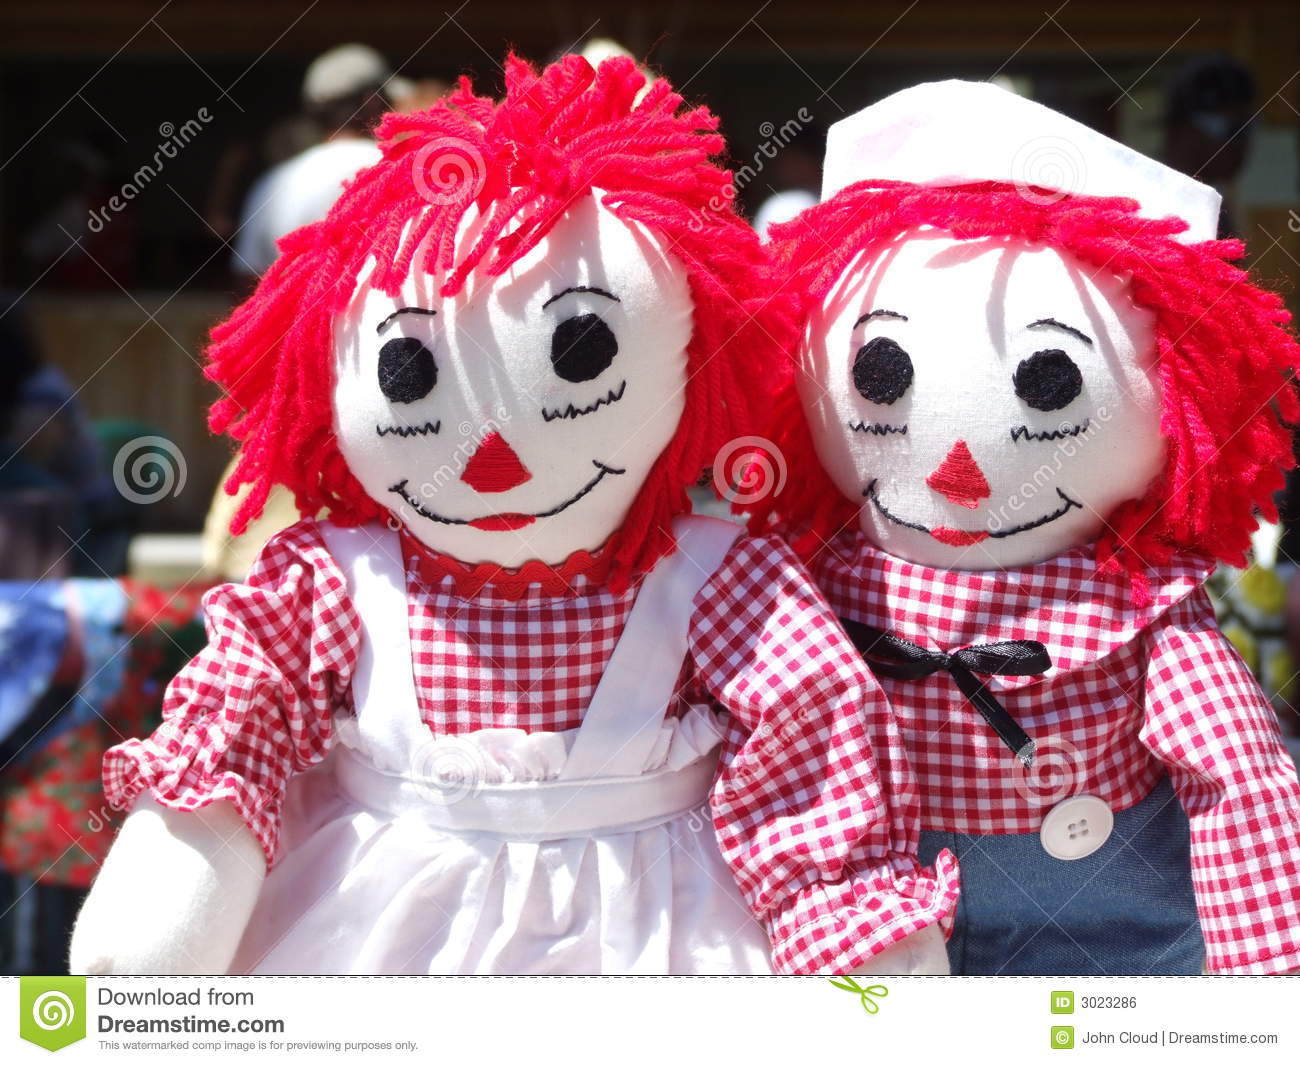 Traditional Raggedy Ann And Andy Dolls With Red Yarn Hair And Matching    